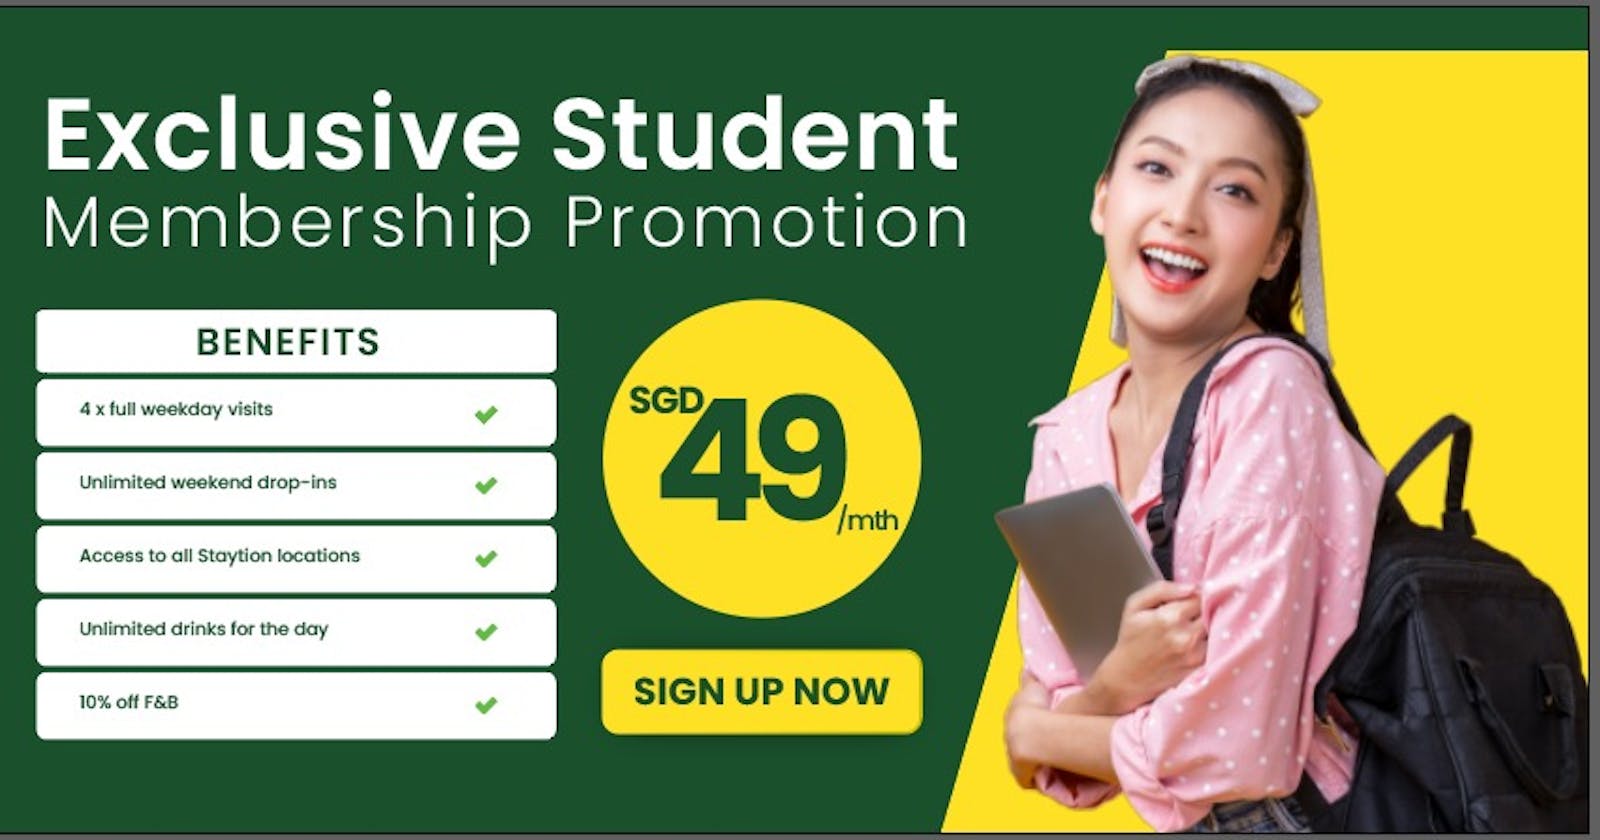 Exclusive Student Membership Promotions - Just $49 per month!